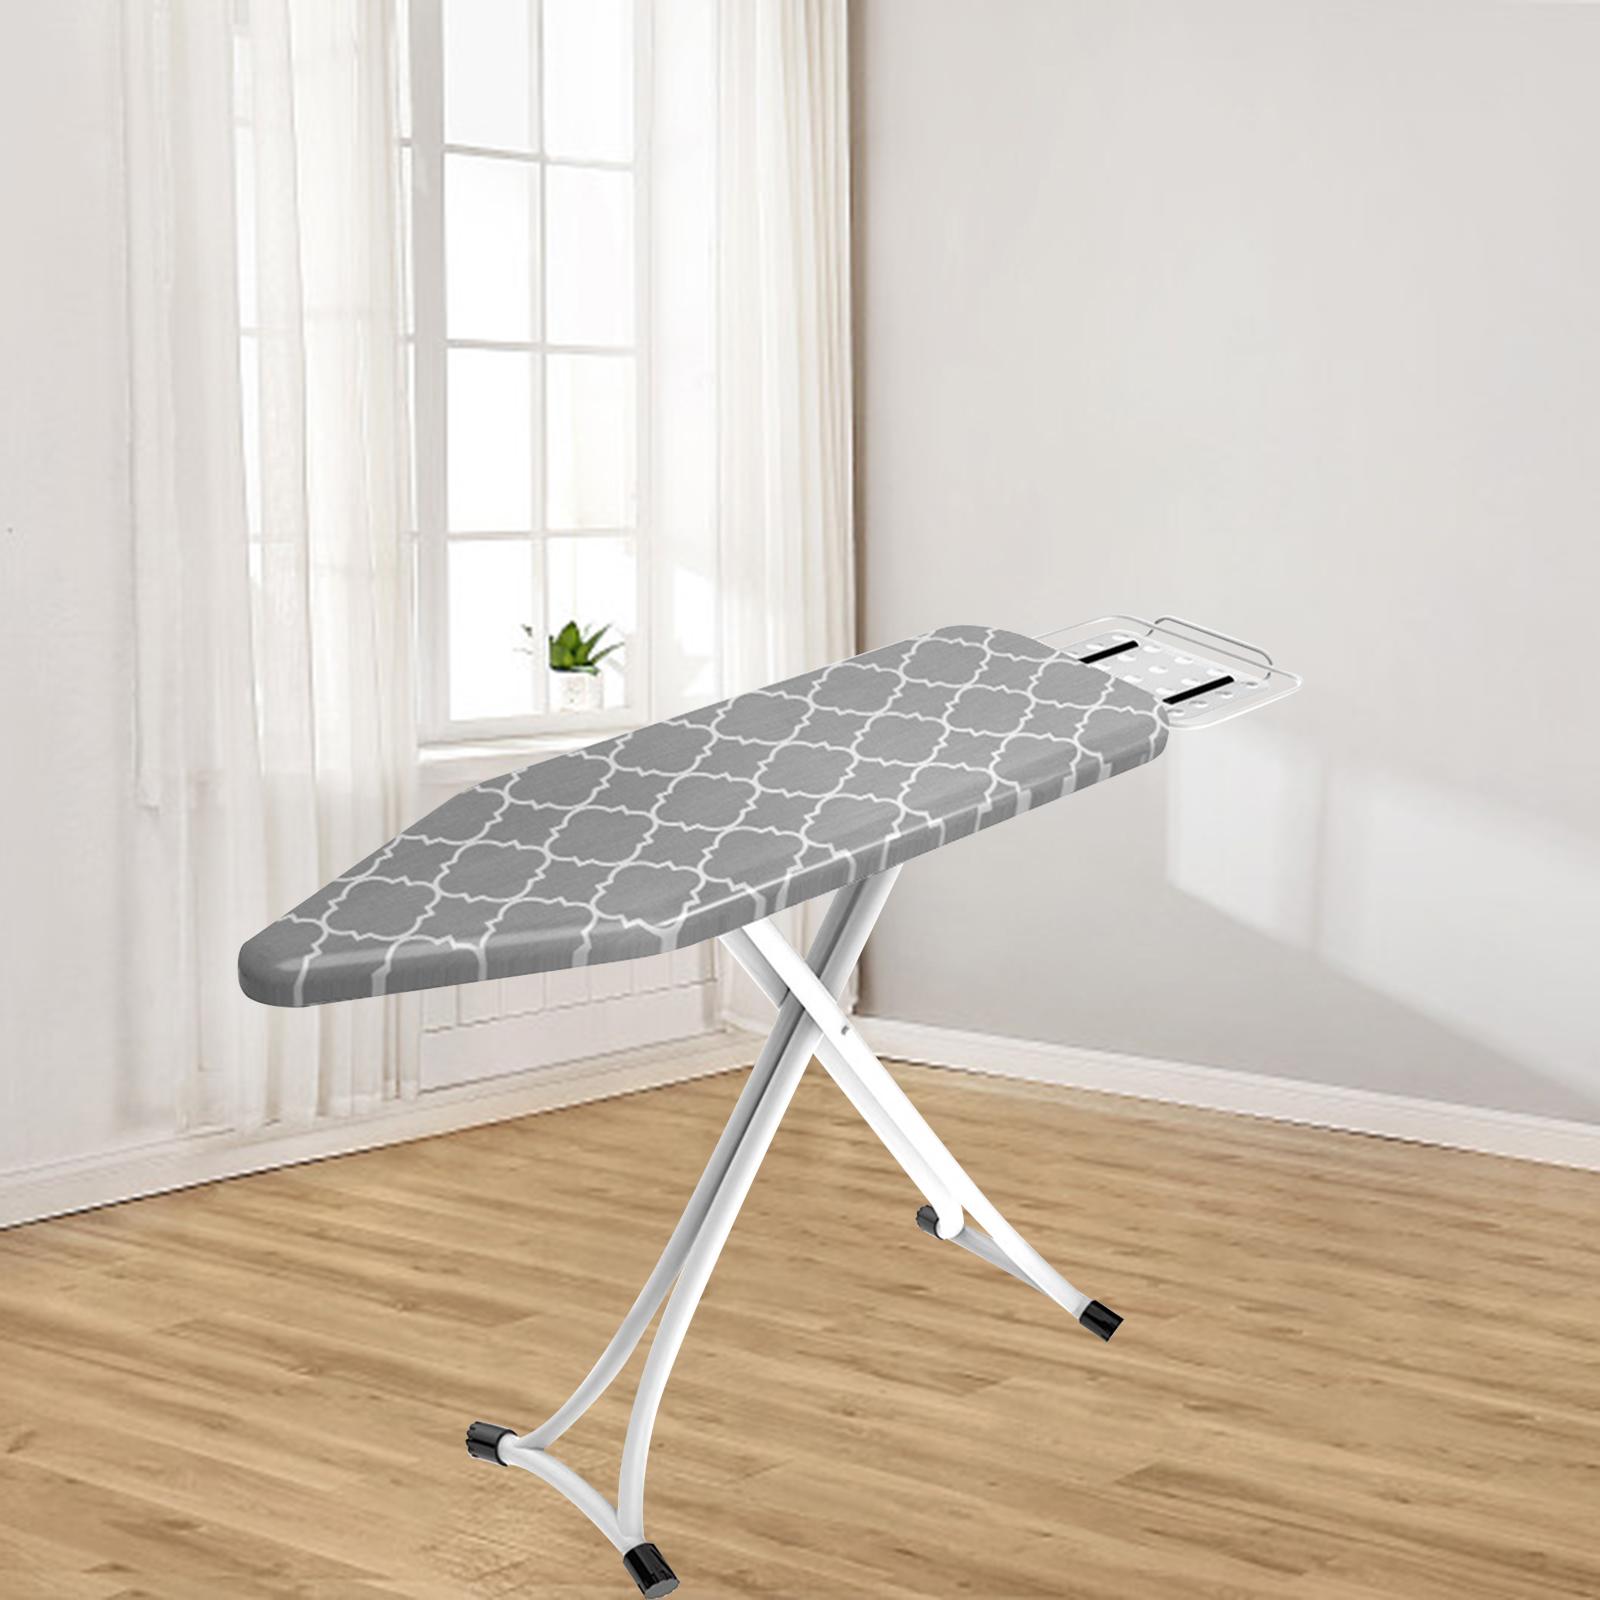 Ironing Table Cover Protector Stain Resistant Ironing Board Cover Laundry Supplies